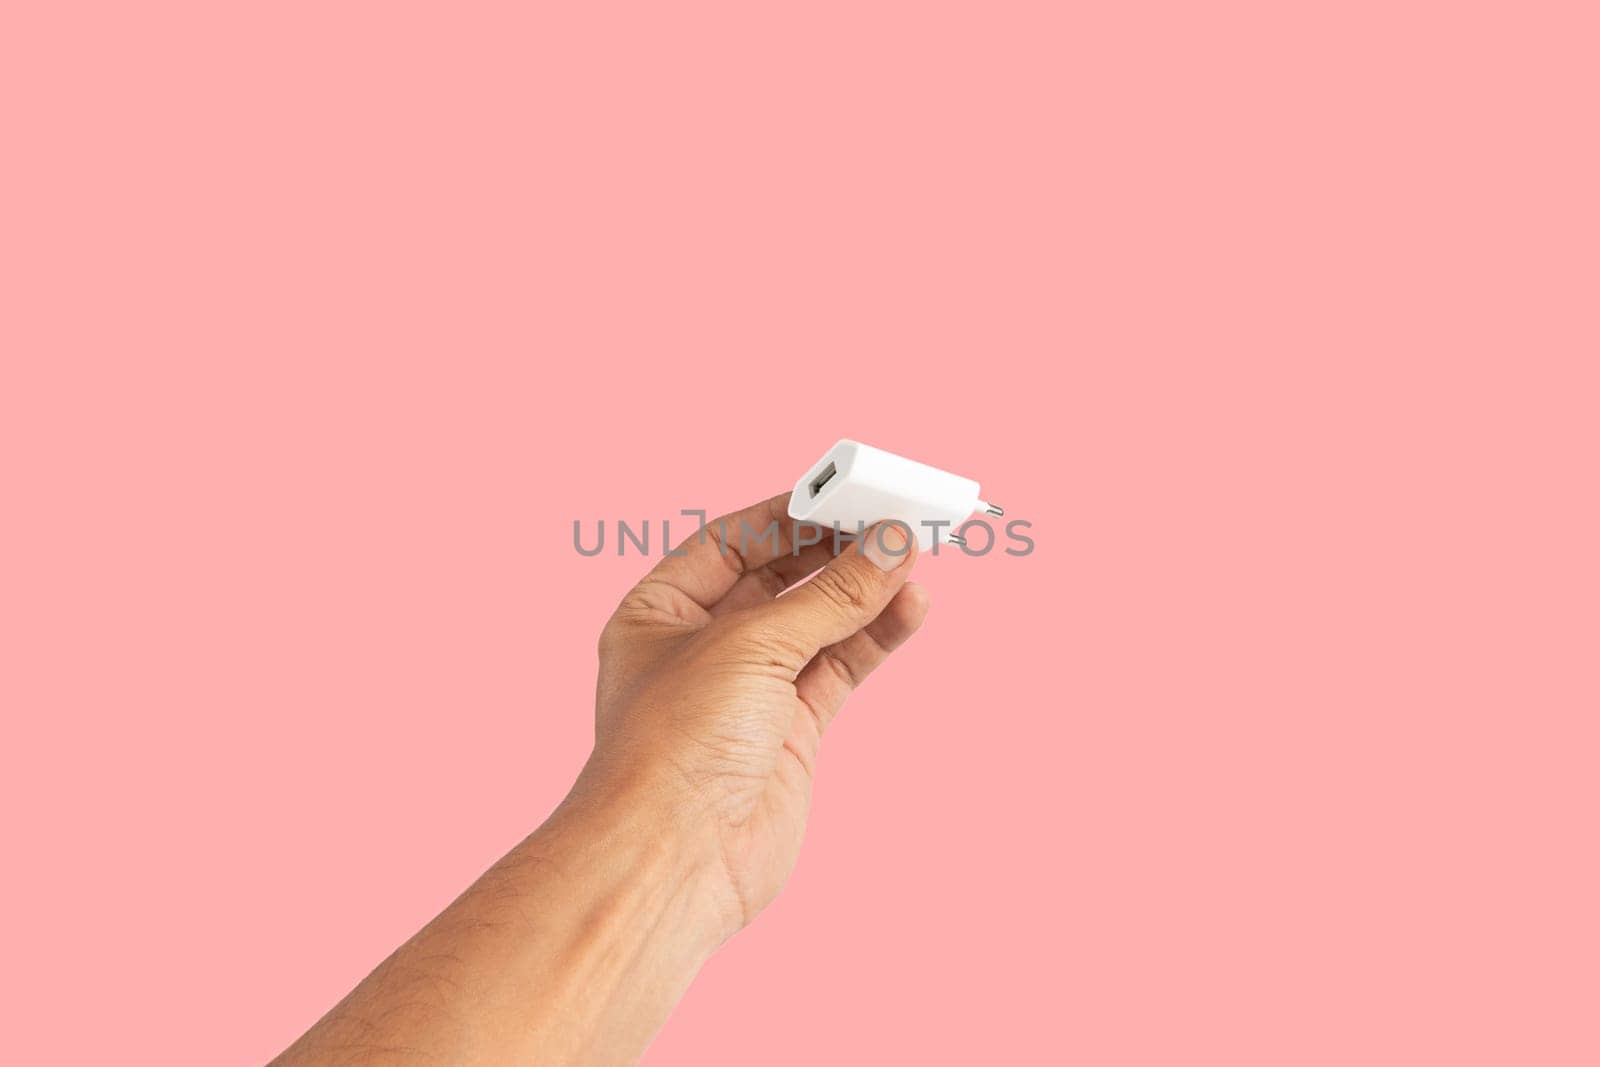 Black male hand holding a USB charger plug isolated on pink background by TropicalNinjaStudio